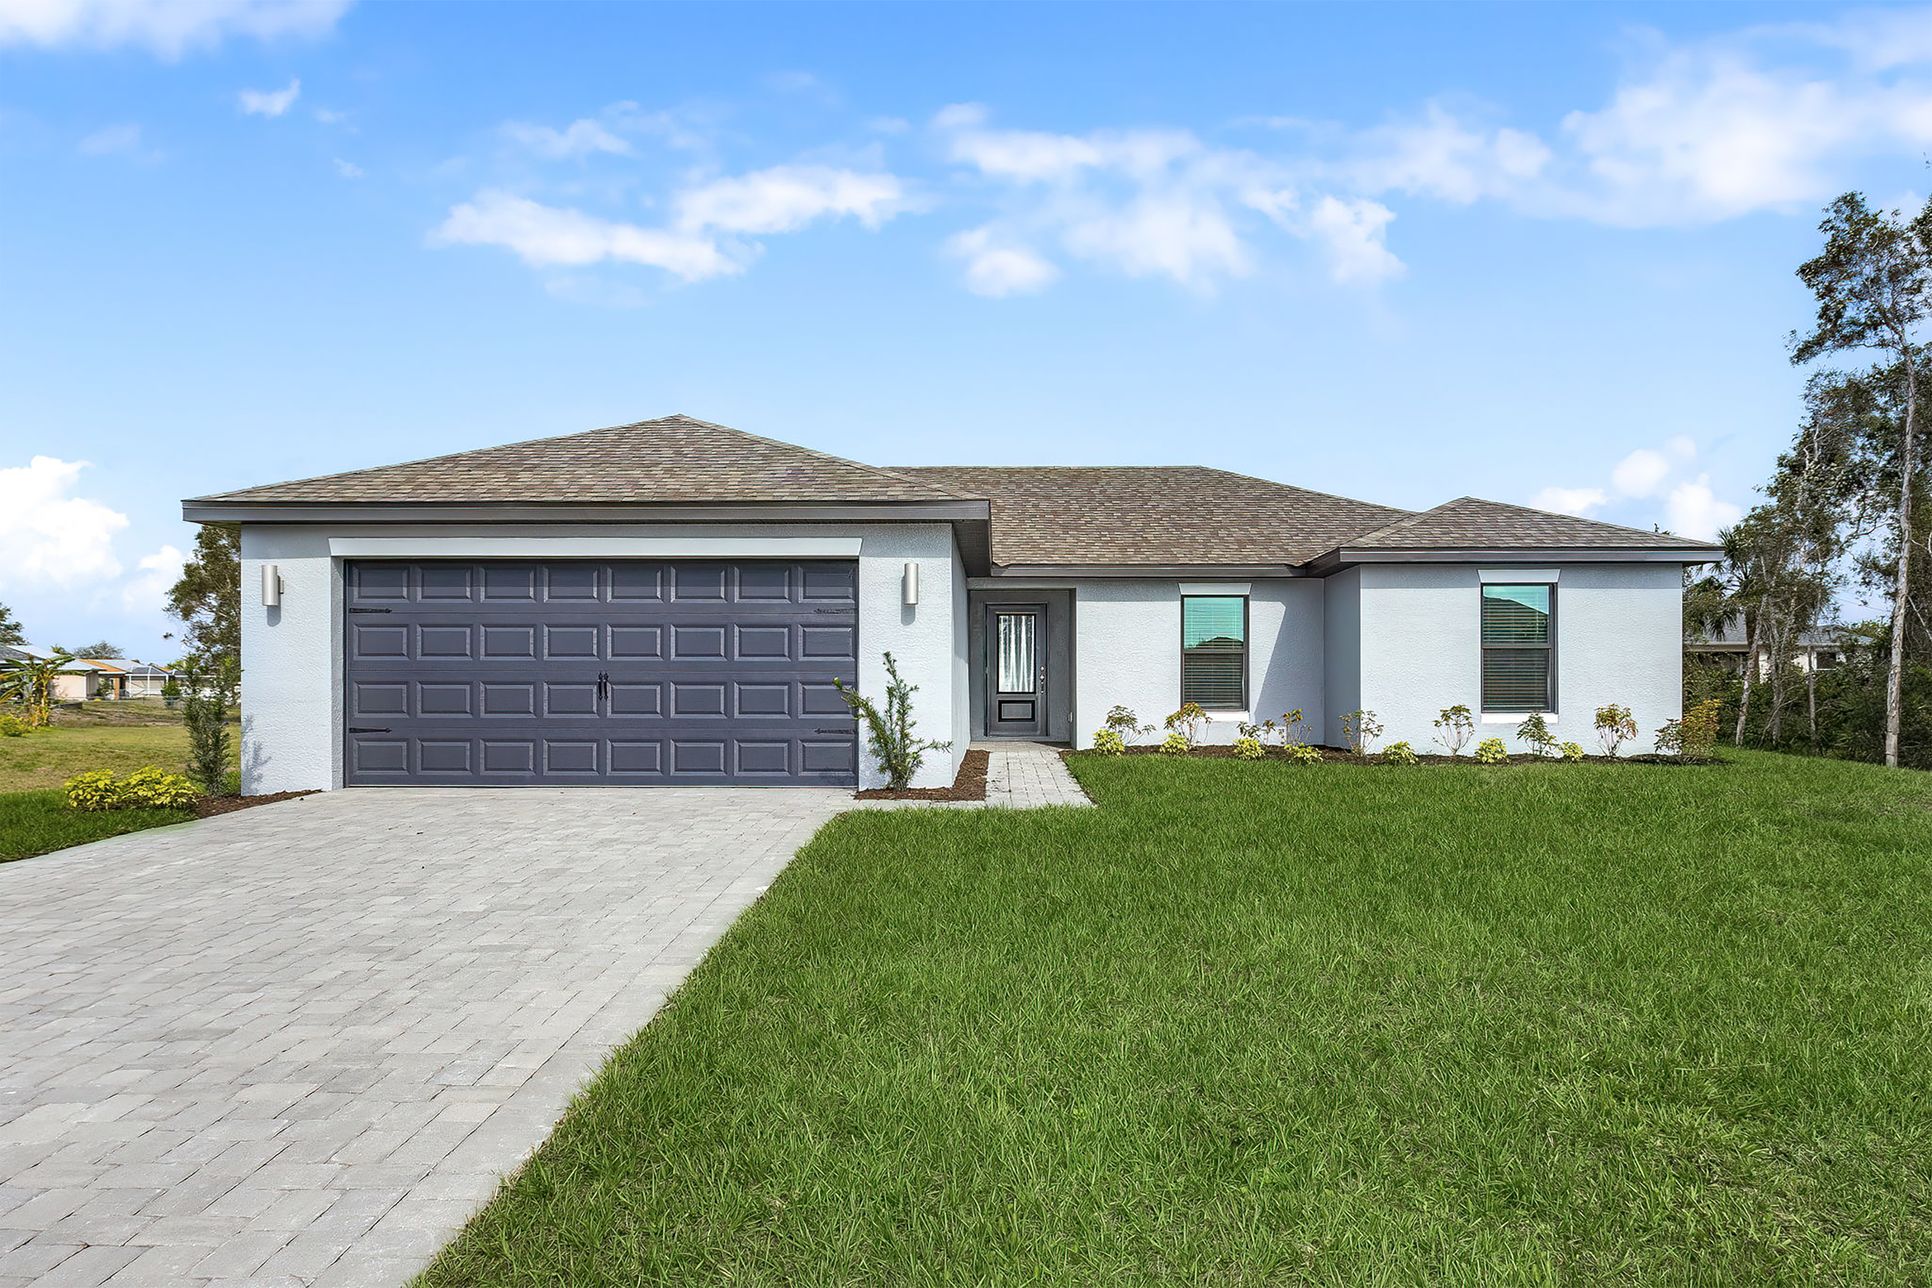 The Brickell by LGI Homes:The Brickell at Cape Coral